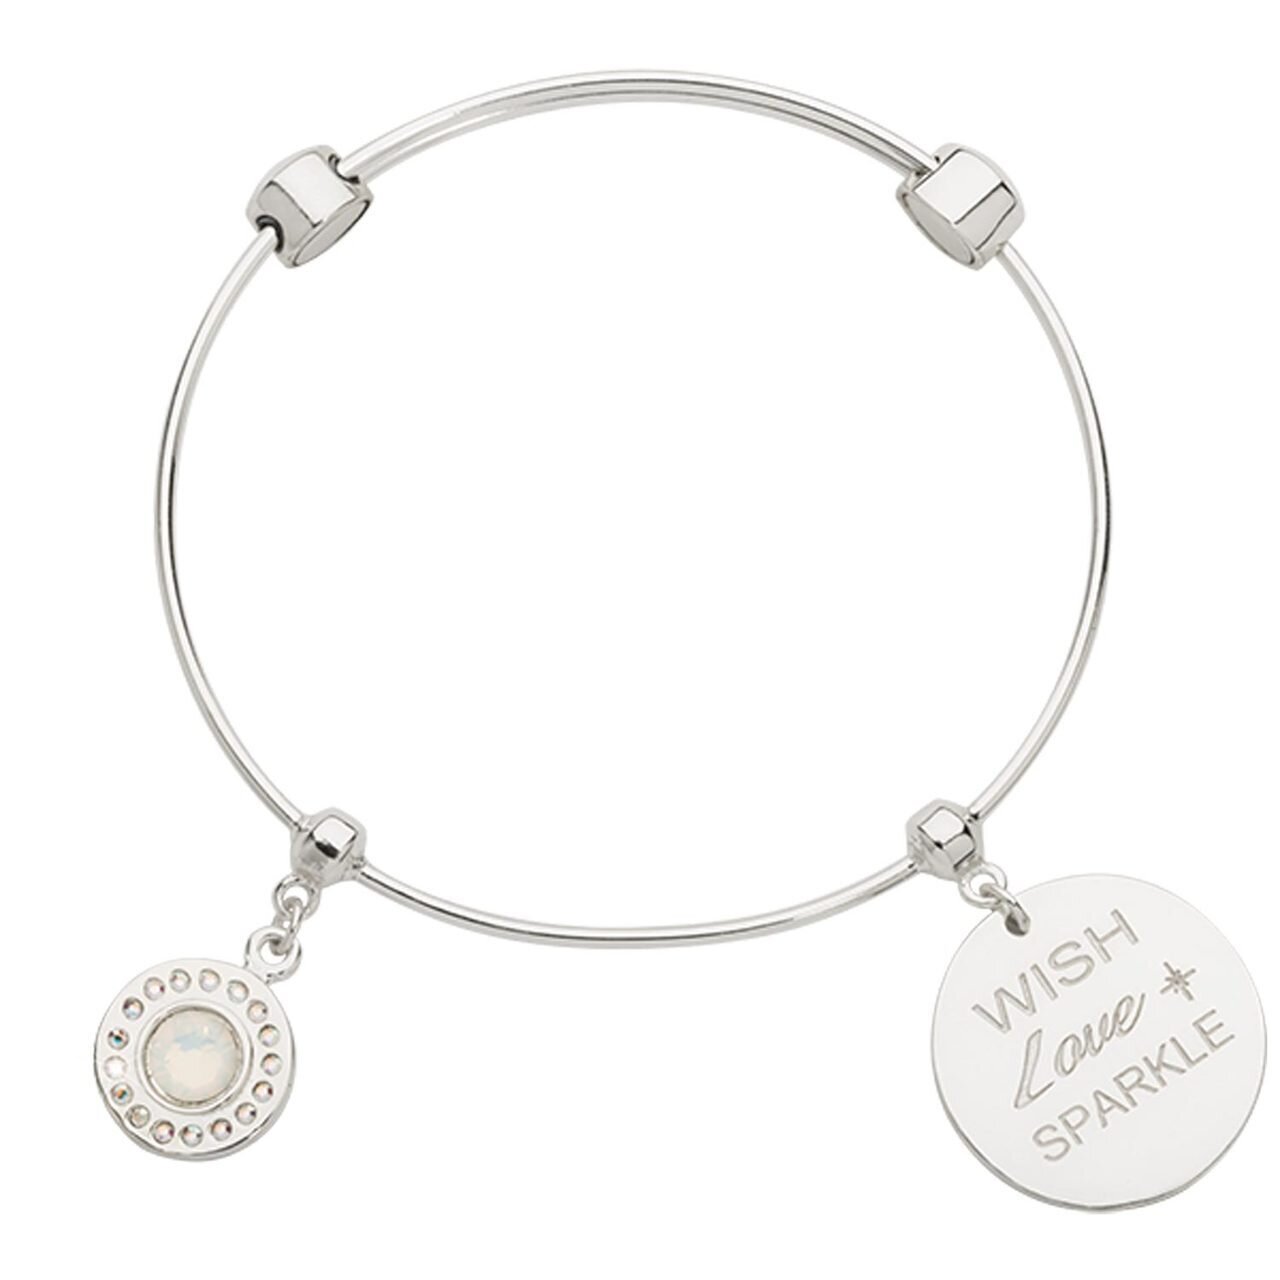 Nikki Lissoni Charm Bangle with Two Fixed Charms White Opal Wish Love Sparkle Silver-plated 17cm B1142S17